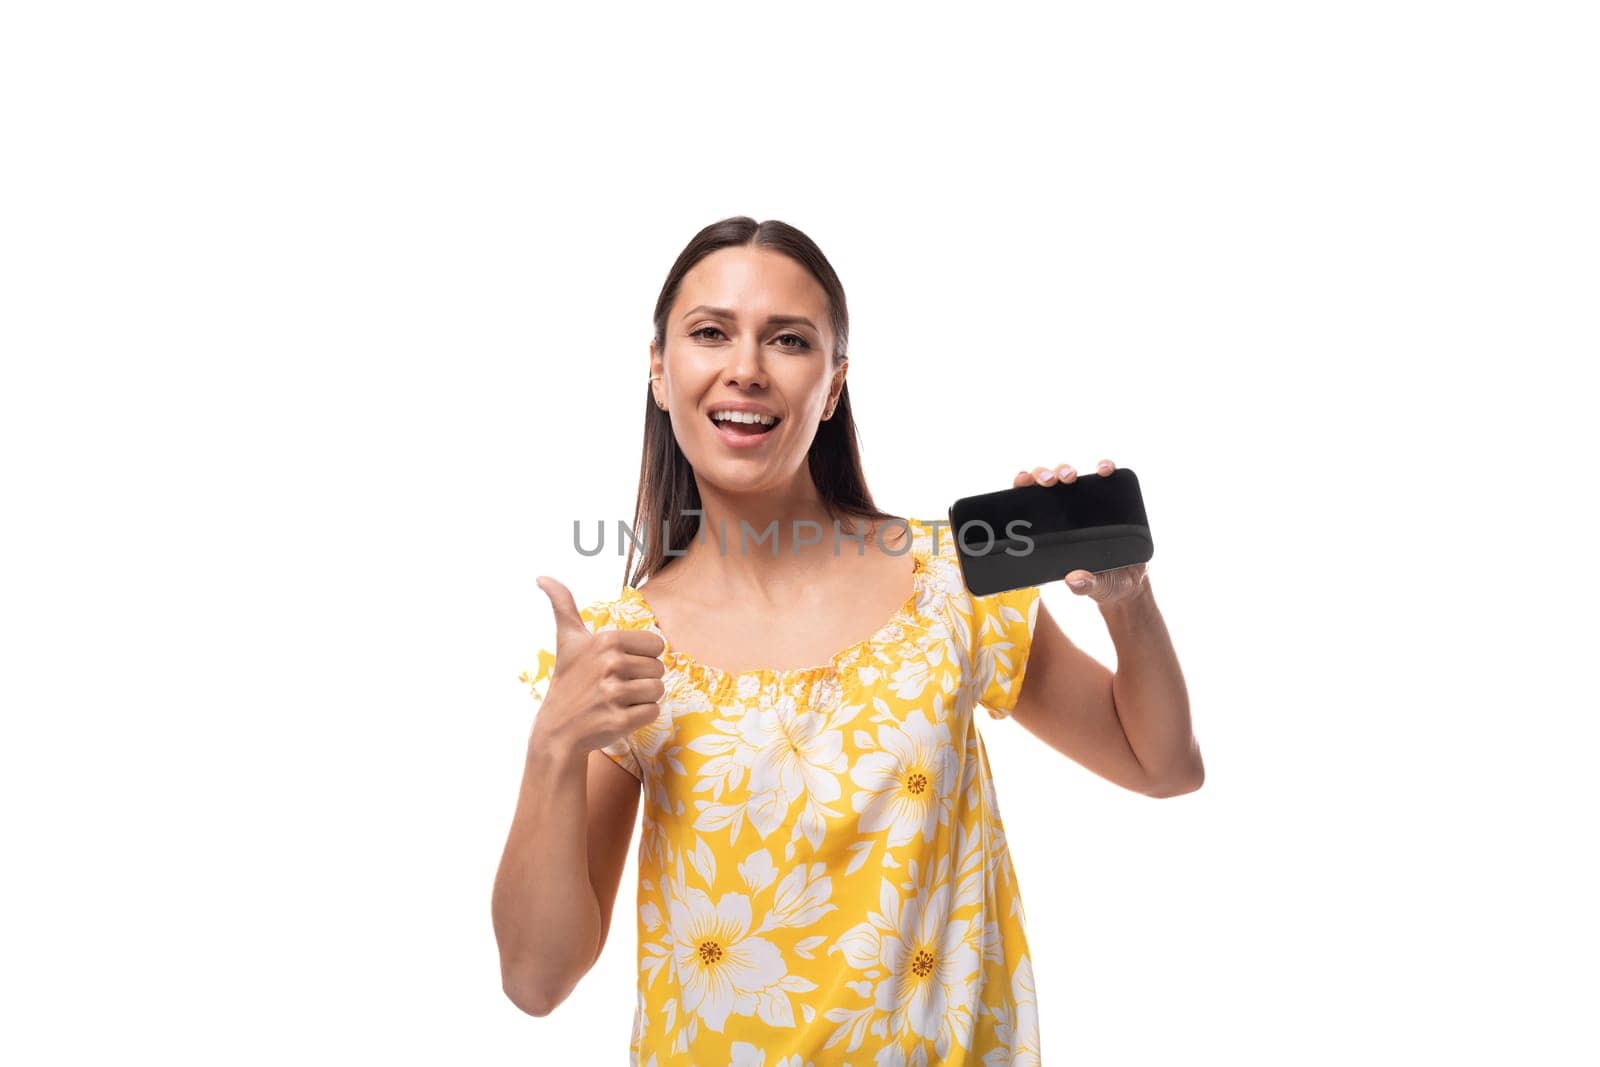 young pretty woman with straight black hair in a yellow sundress with a daisy pattern shows a smartphone screen with a mockup.